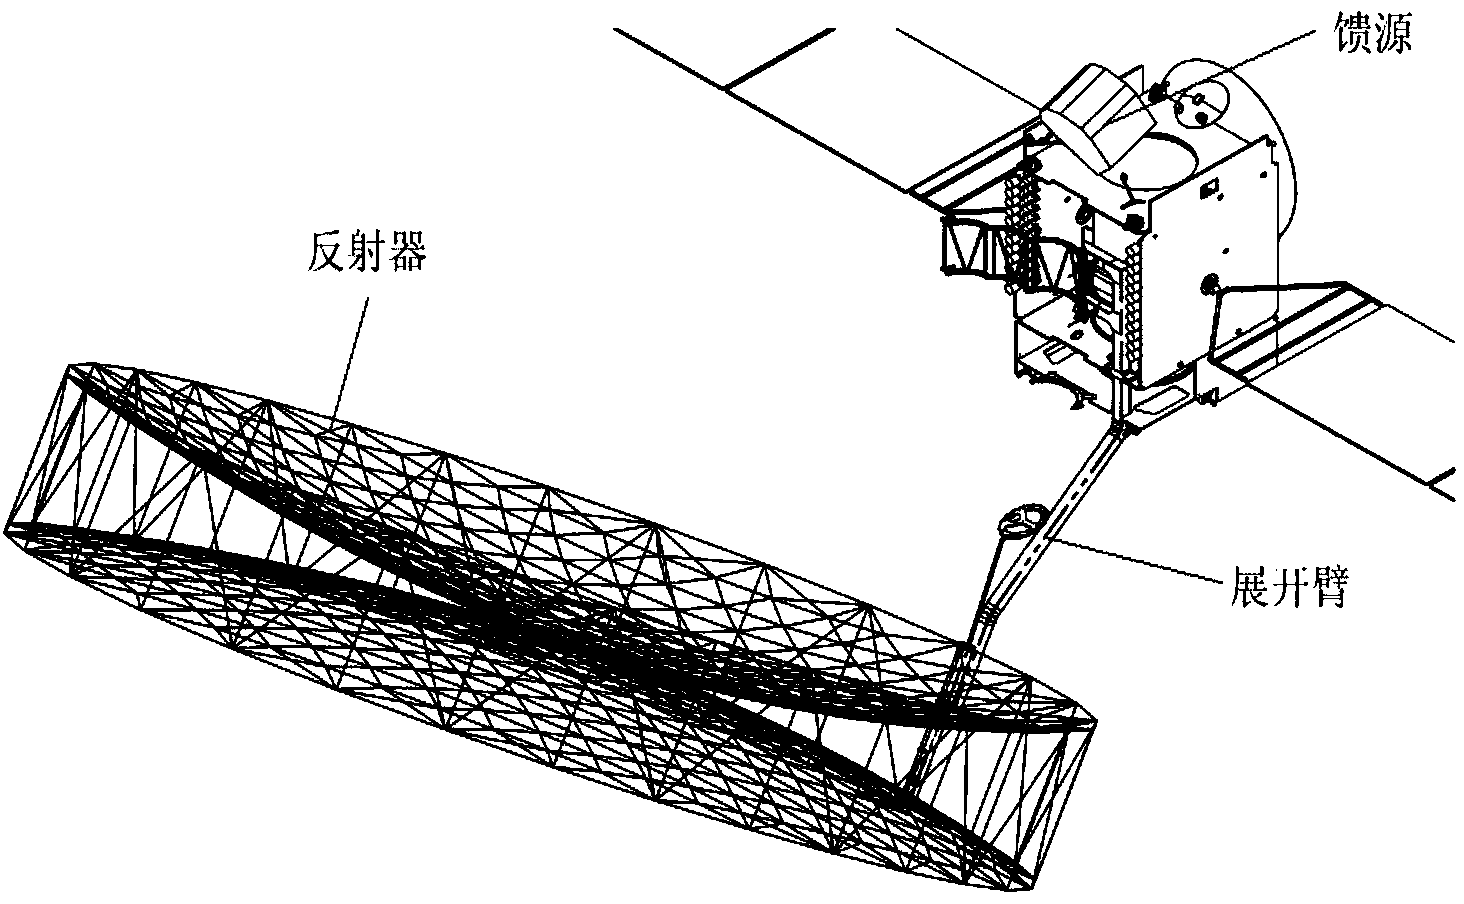 Method for designing spatial arrangement of foldable space-borne antenna multi-joint pointing mechanism